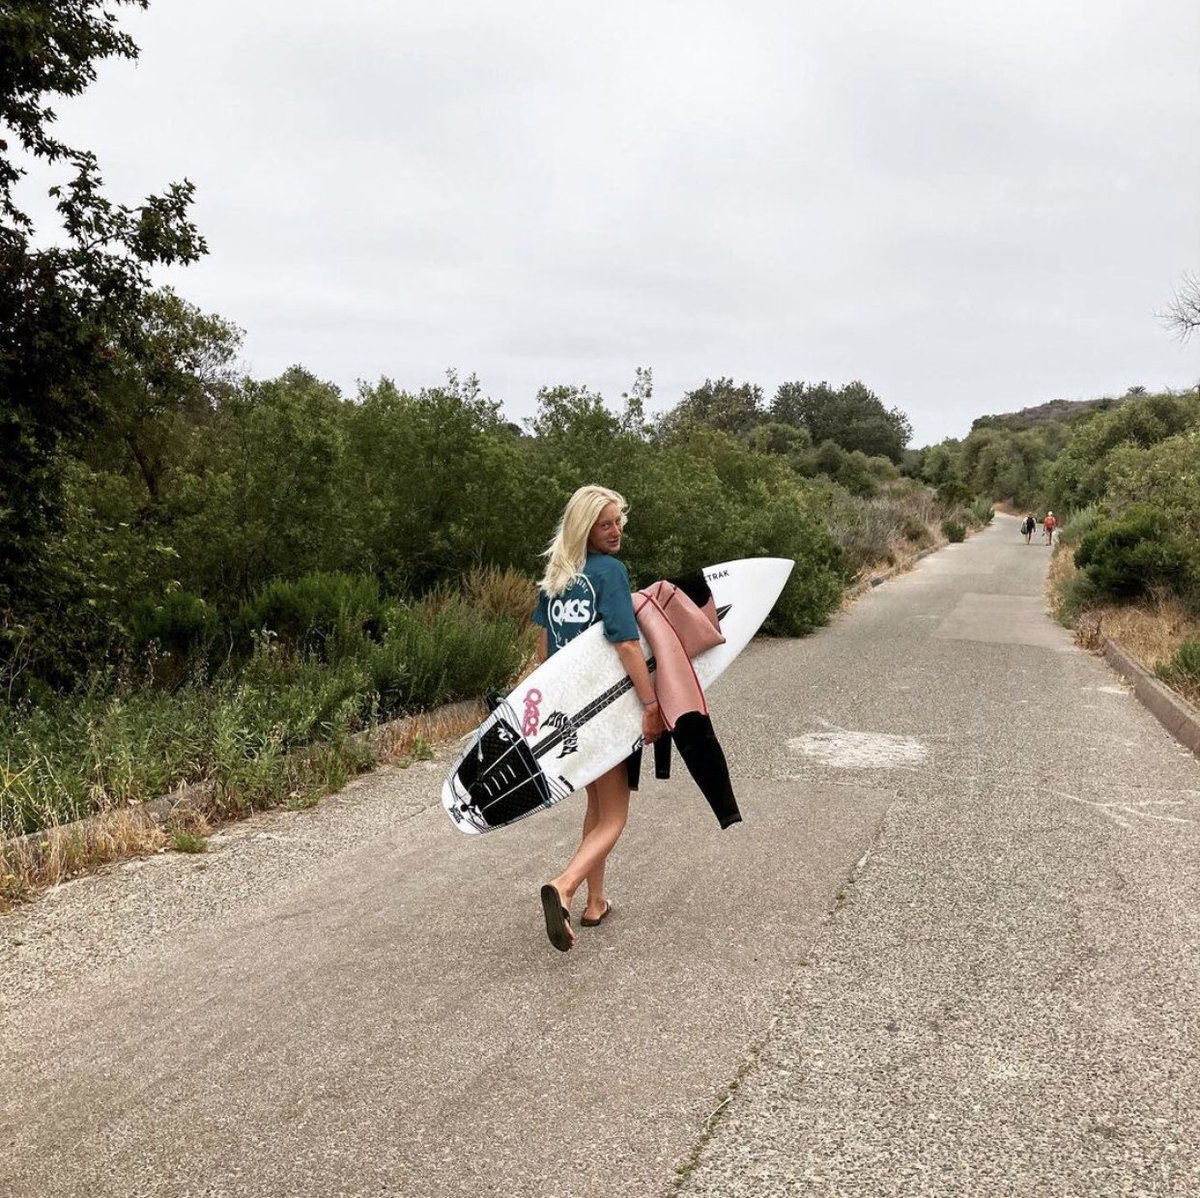 Isabelle Kryger knows wassup! On her way to bash some waves. #surf #surfing #surfsup #qaosfamily #intourbones #surfboard #surfapparel #streetwear 
qaosgear.com